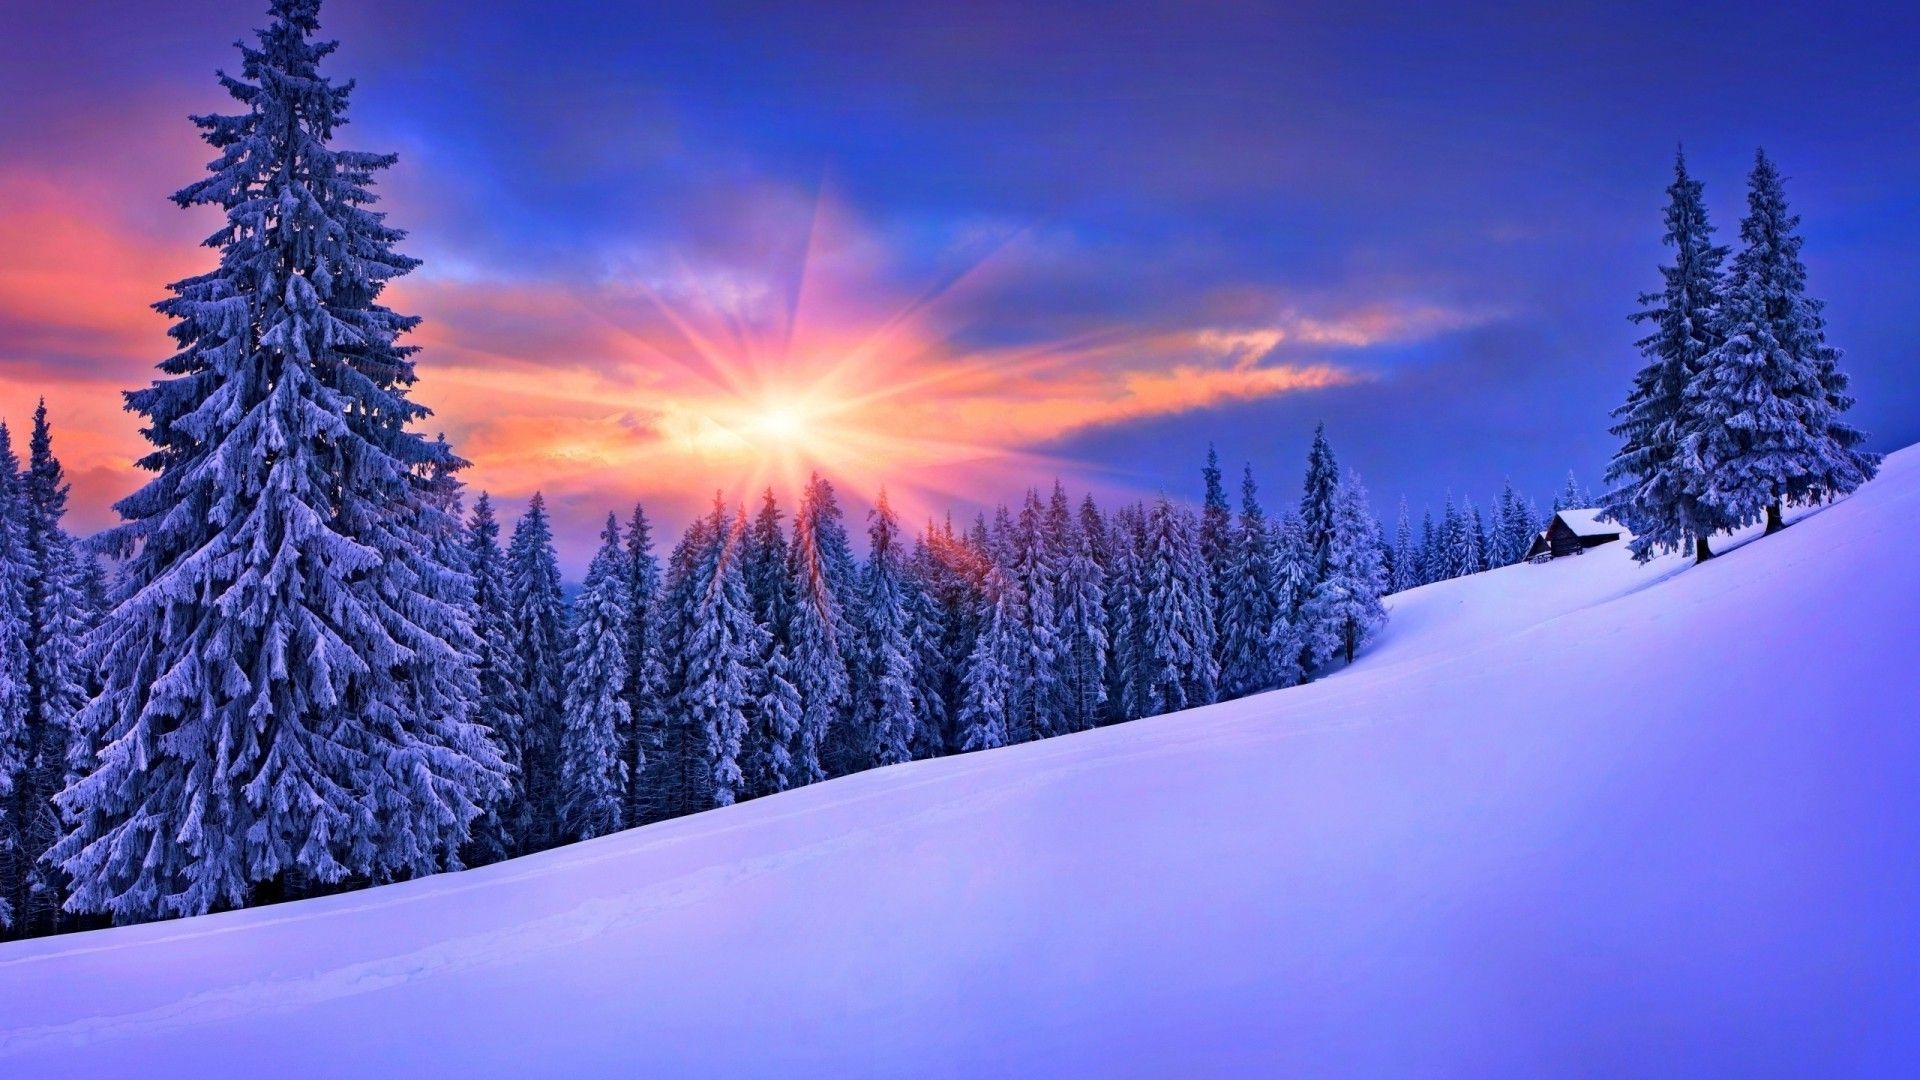 Awesome winter nature wallpapers, HD images, 1920x1080 Full HD Desktop